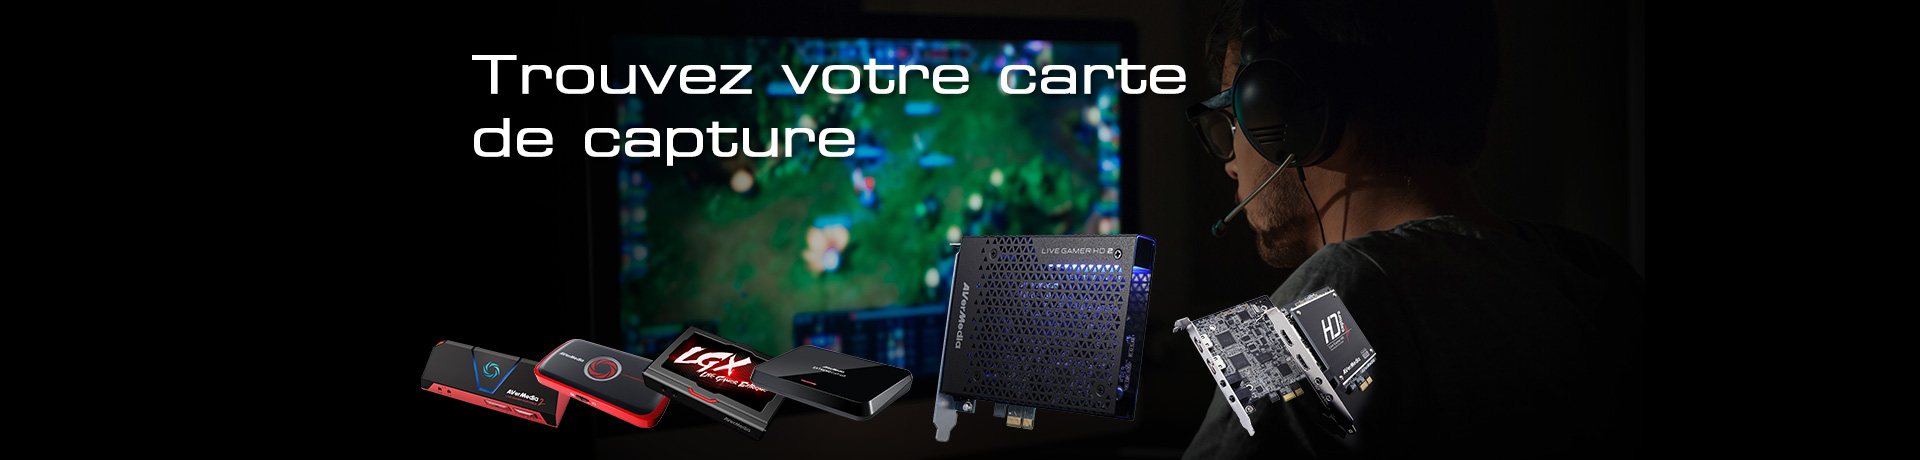 Find Your Capture Card